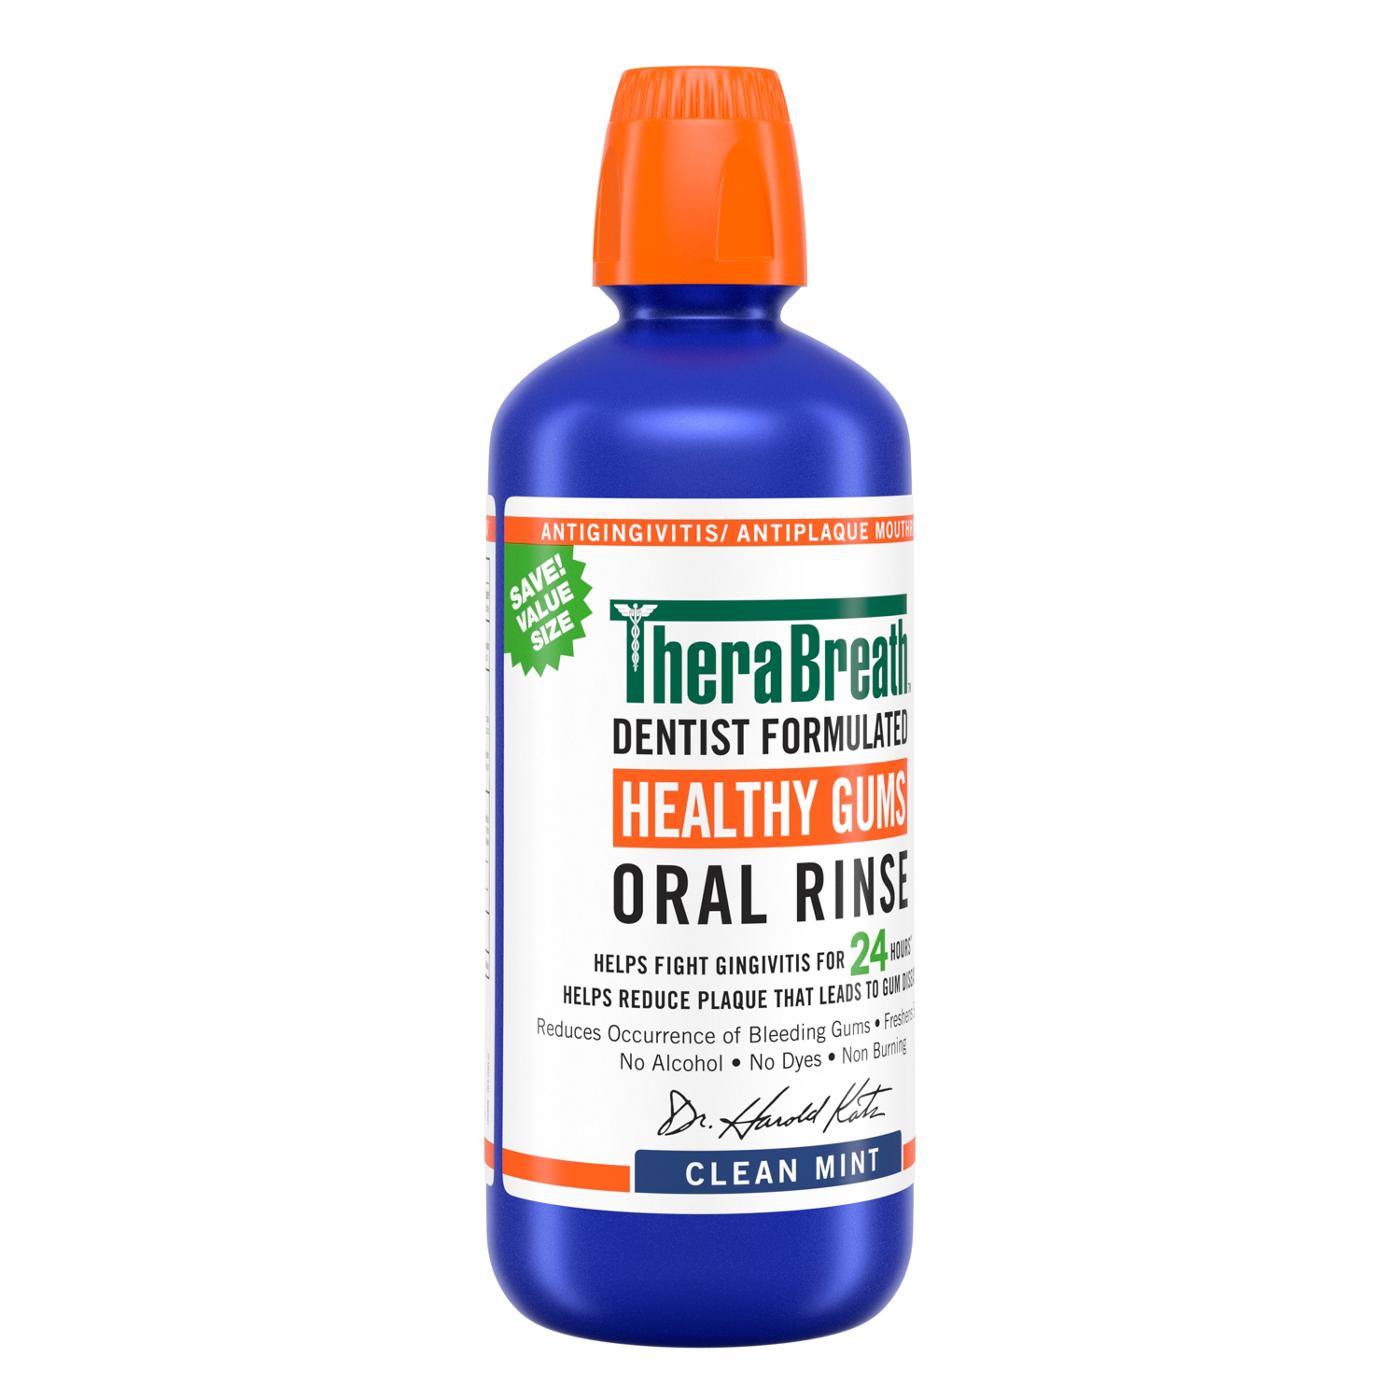 TheraBreath Healthy Gums Oral Rinse - Clean Mint; image 3 of 6